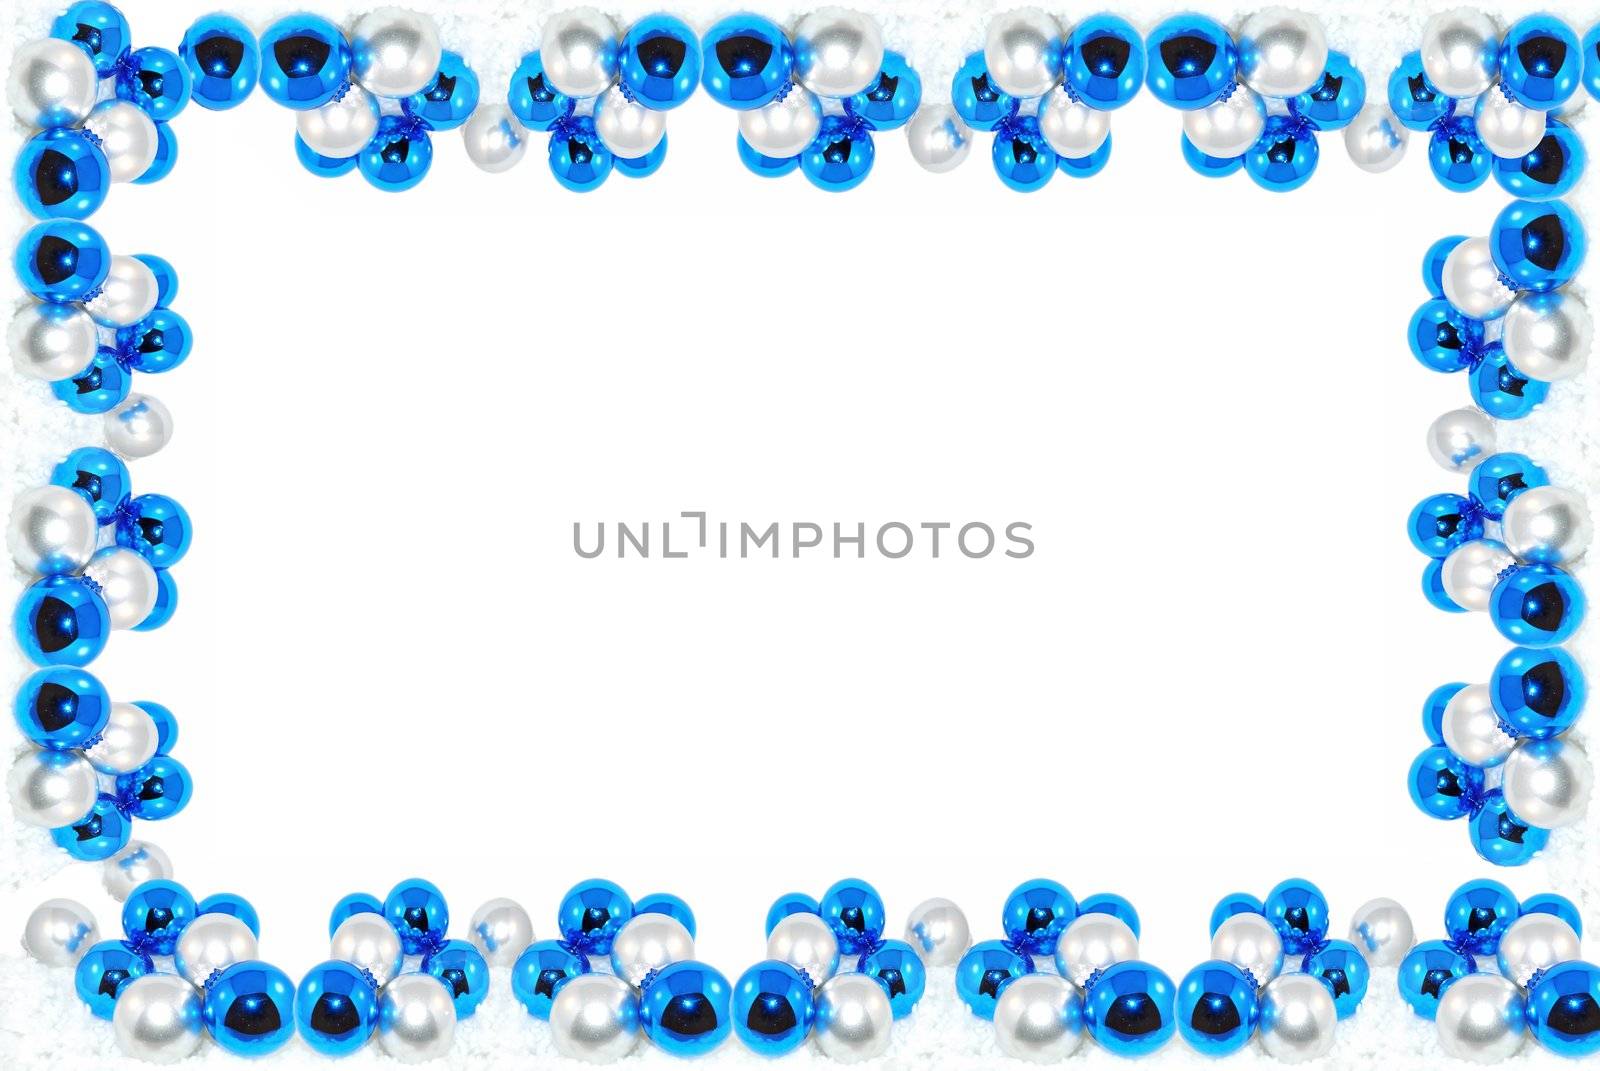 Blue and Metallic Chistmas frame  by MaxkateUSA